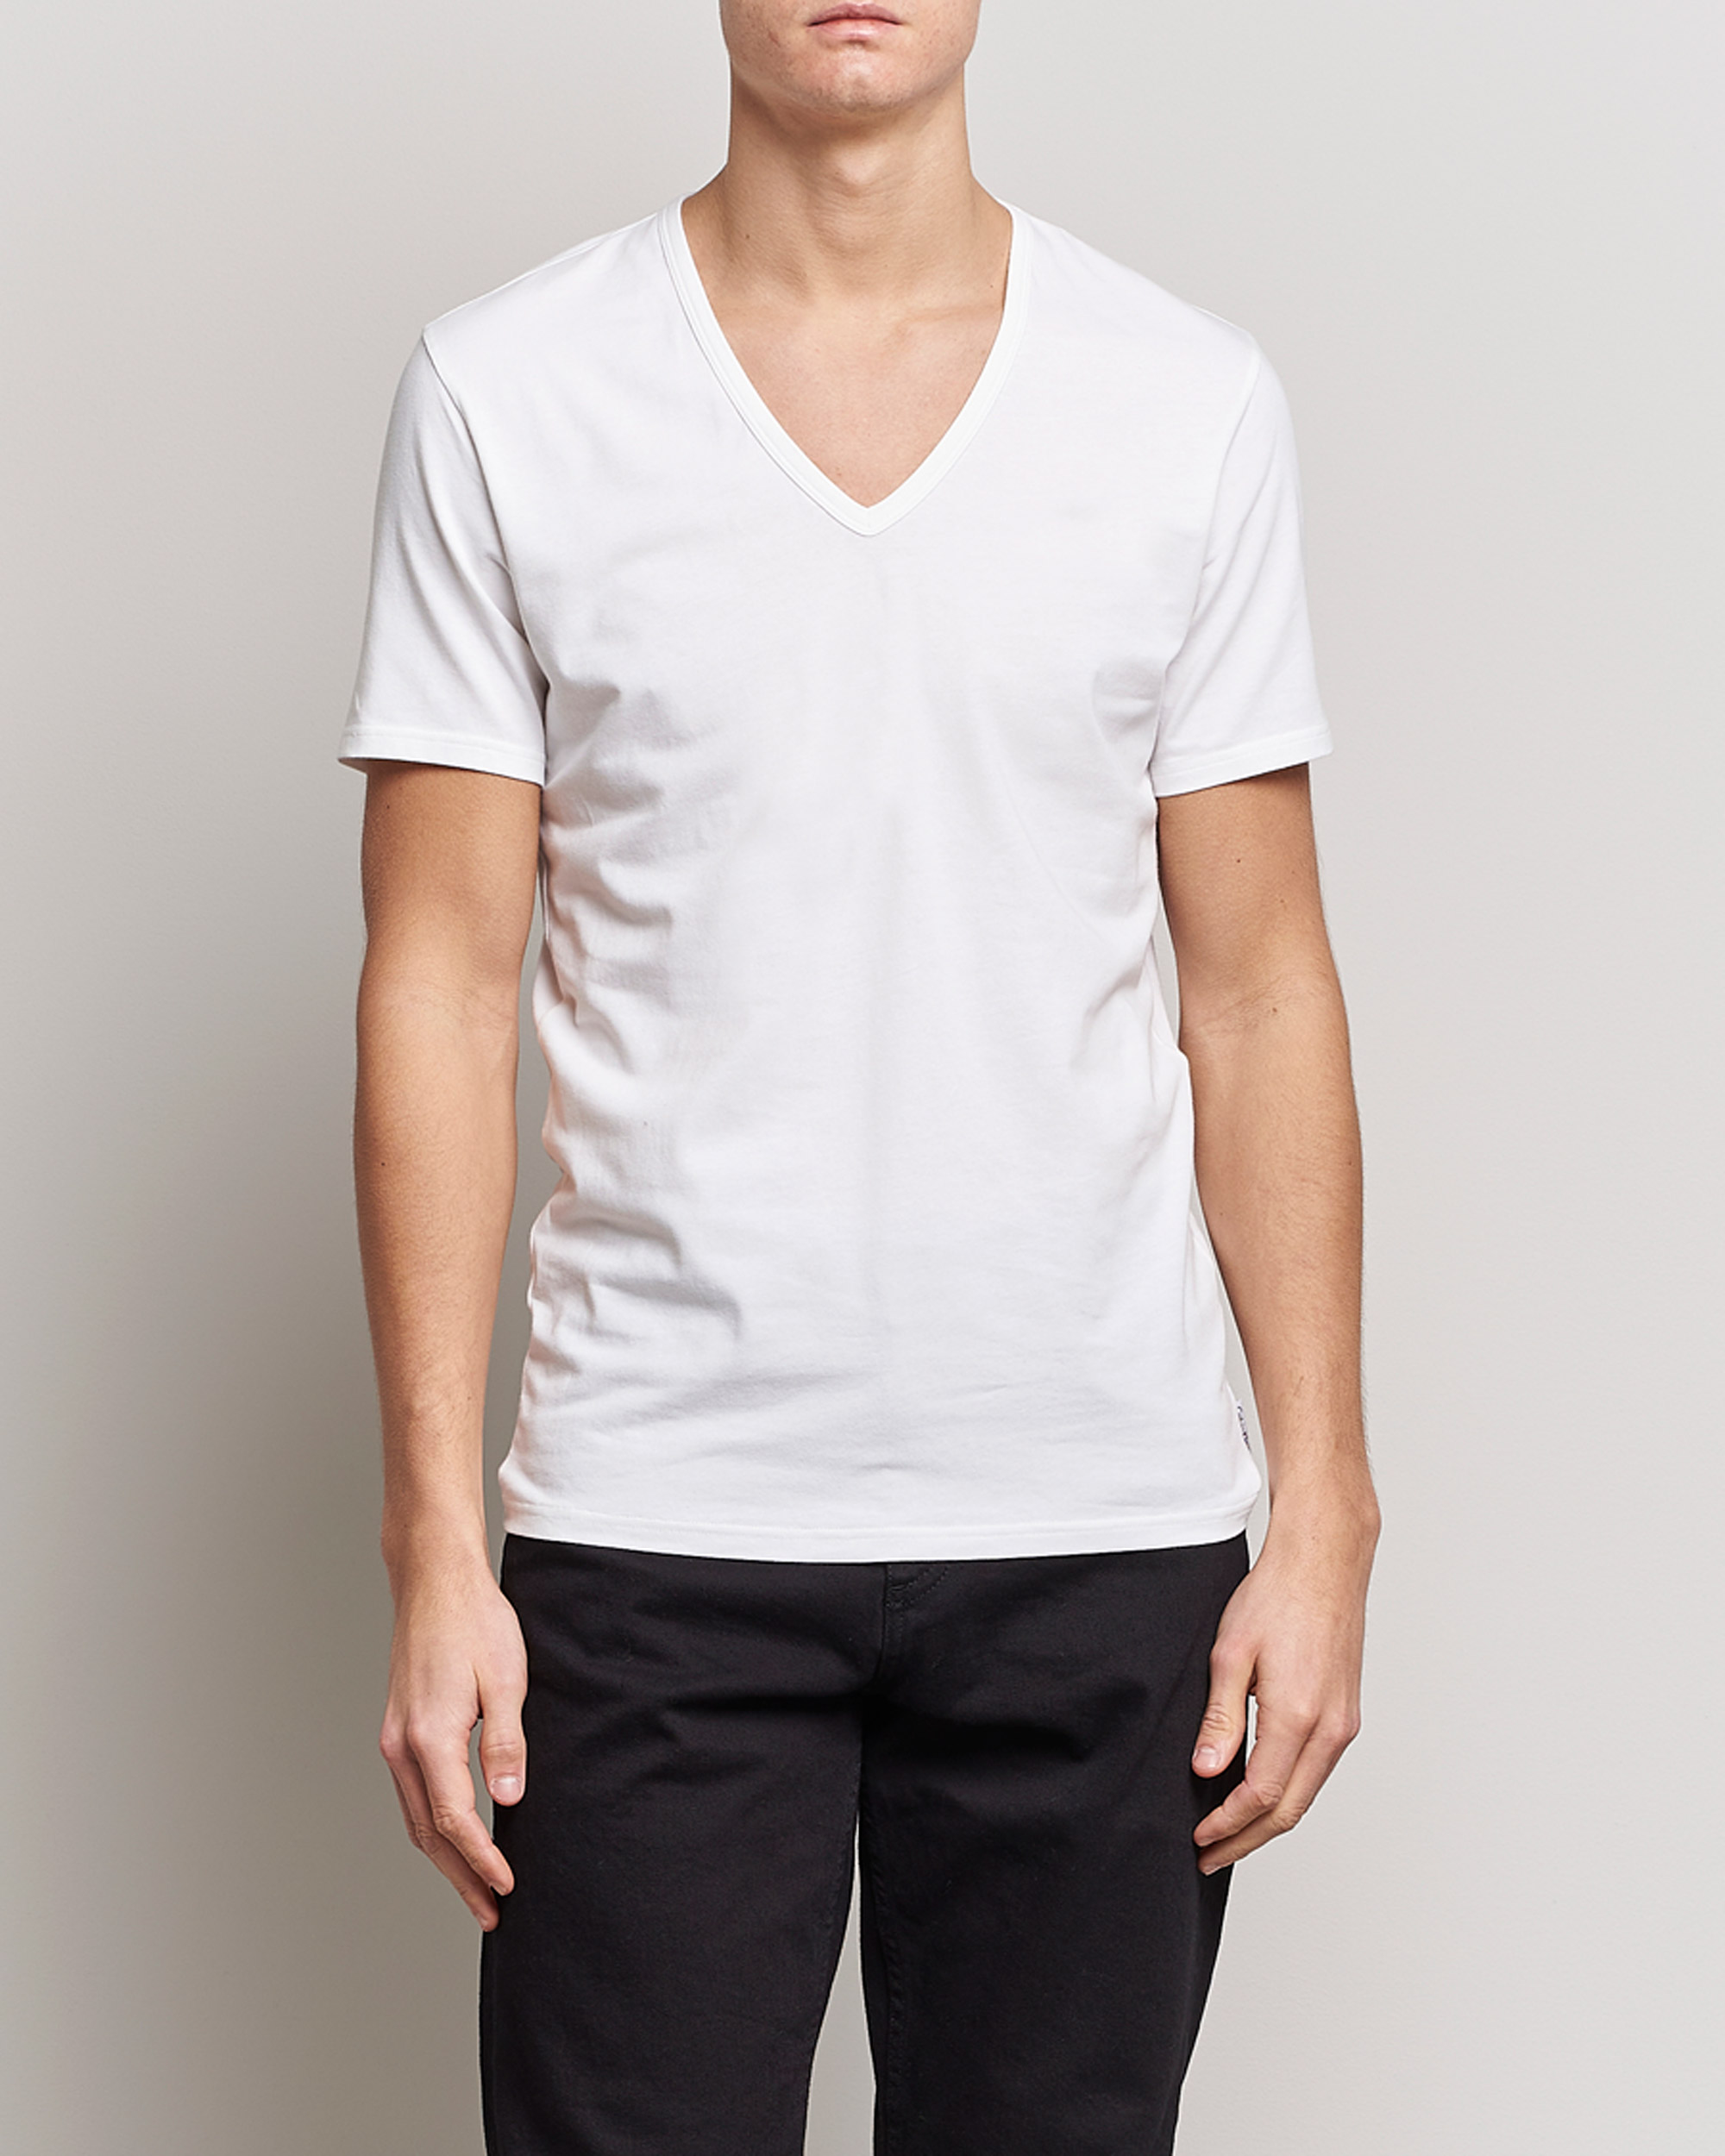 Care Calvin Klein Cotton bei V-Neck Carl of Tee 2-Pack White